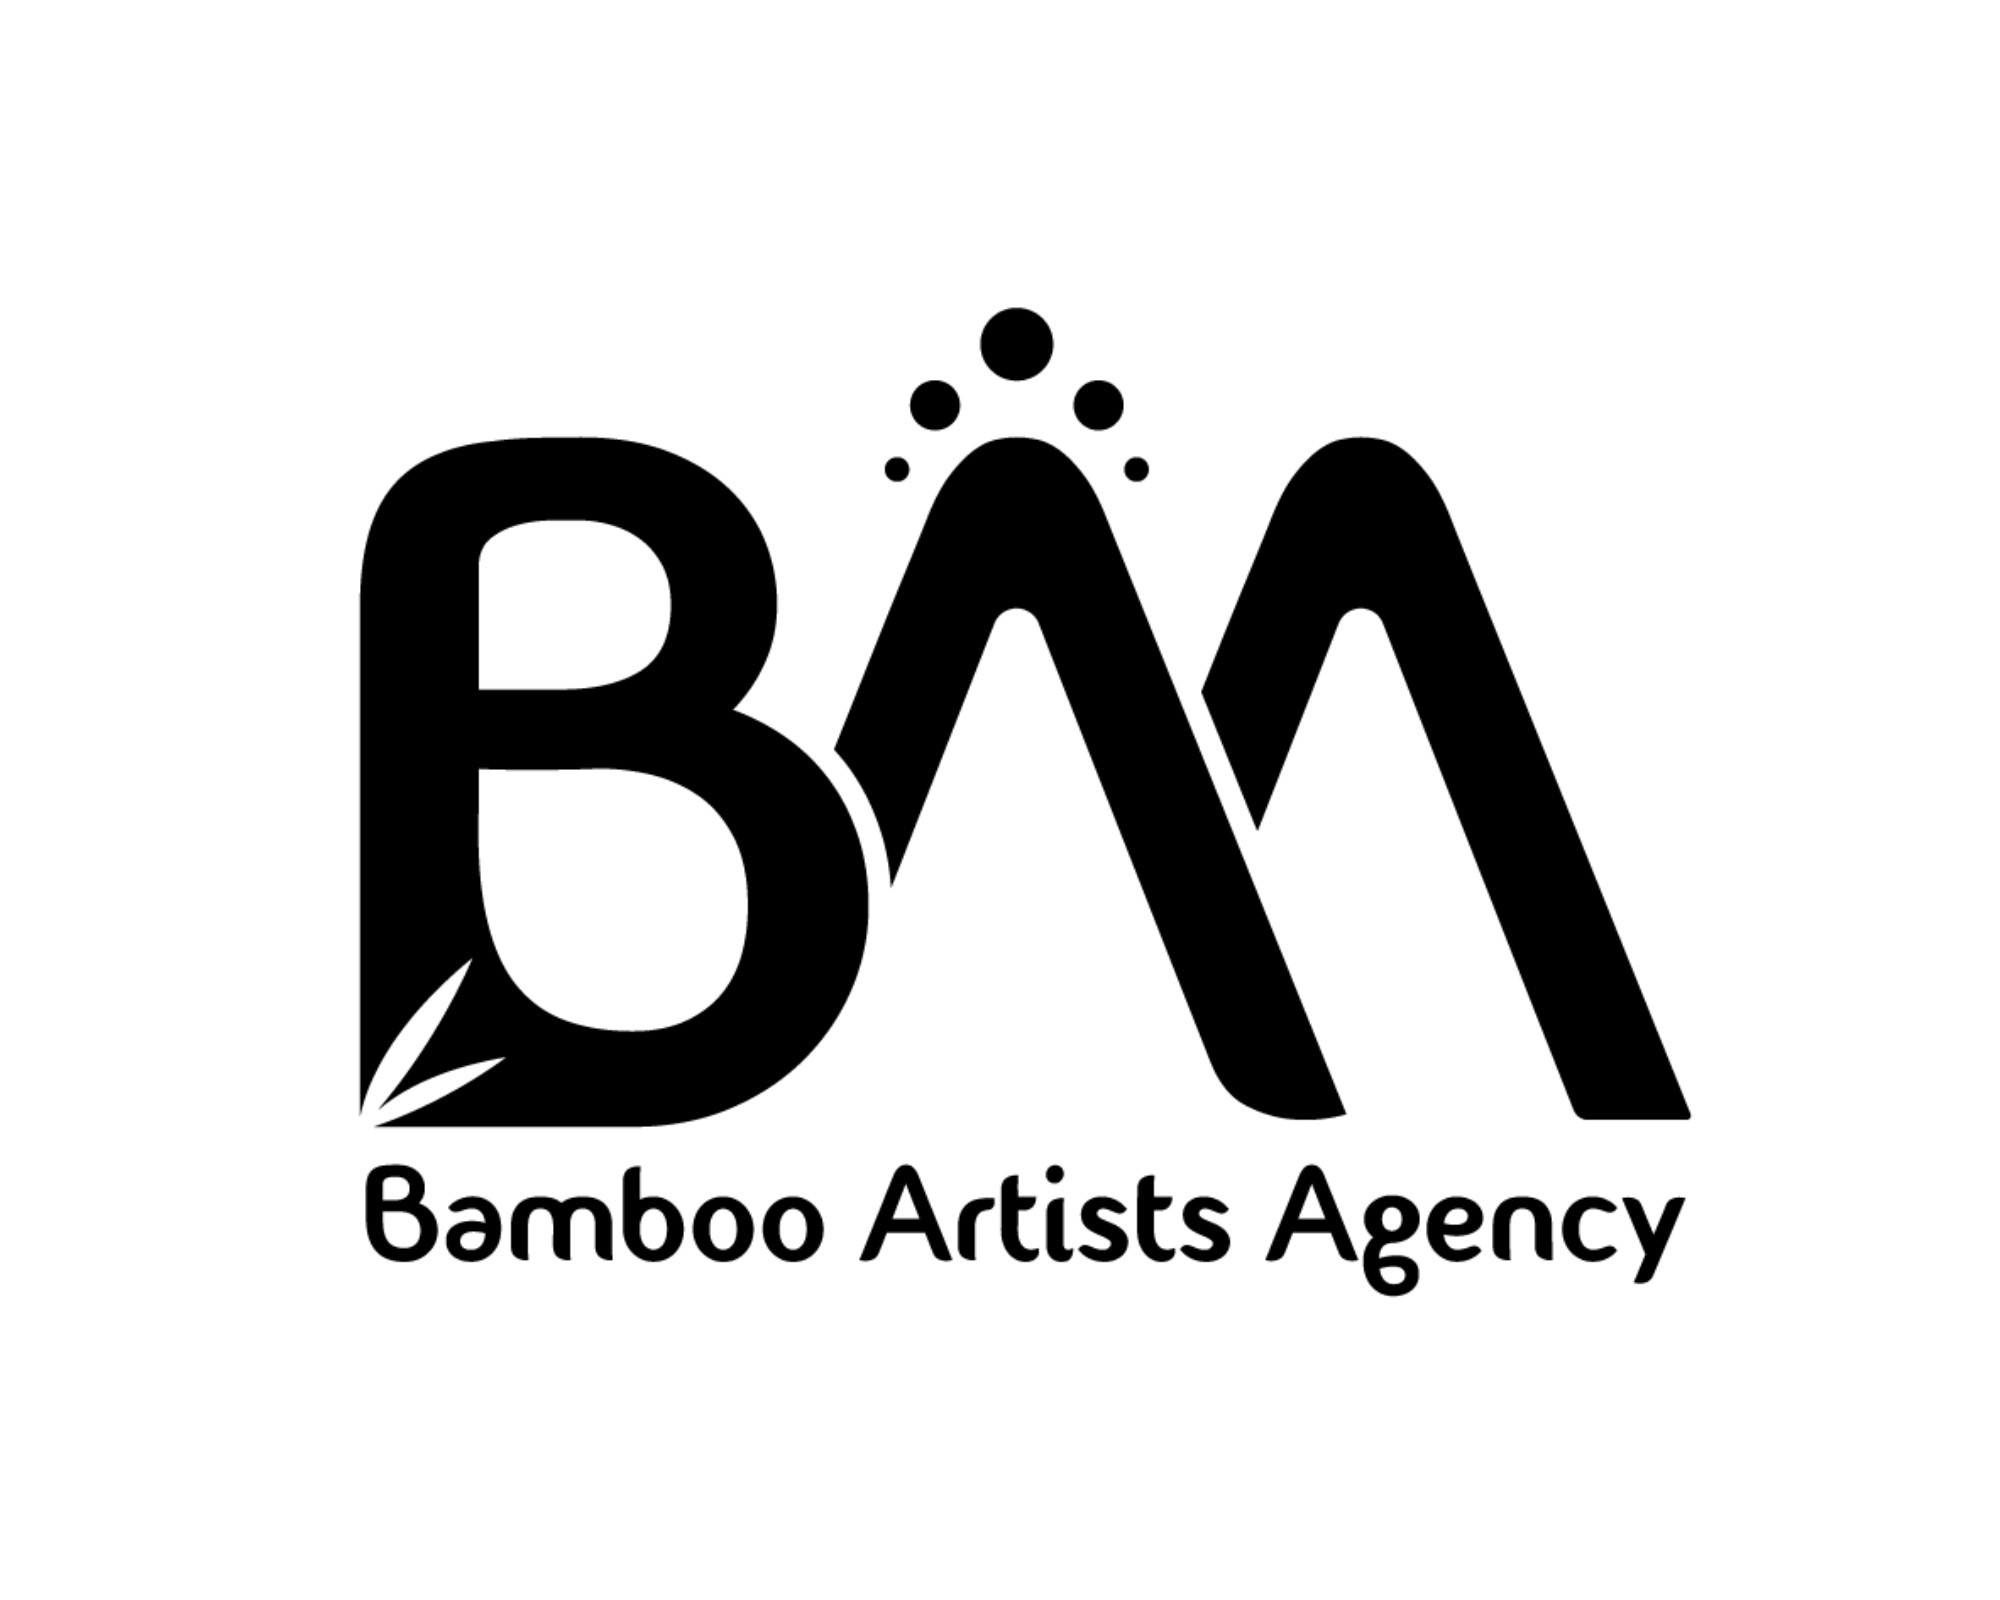 Bamboo Artists Agency